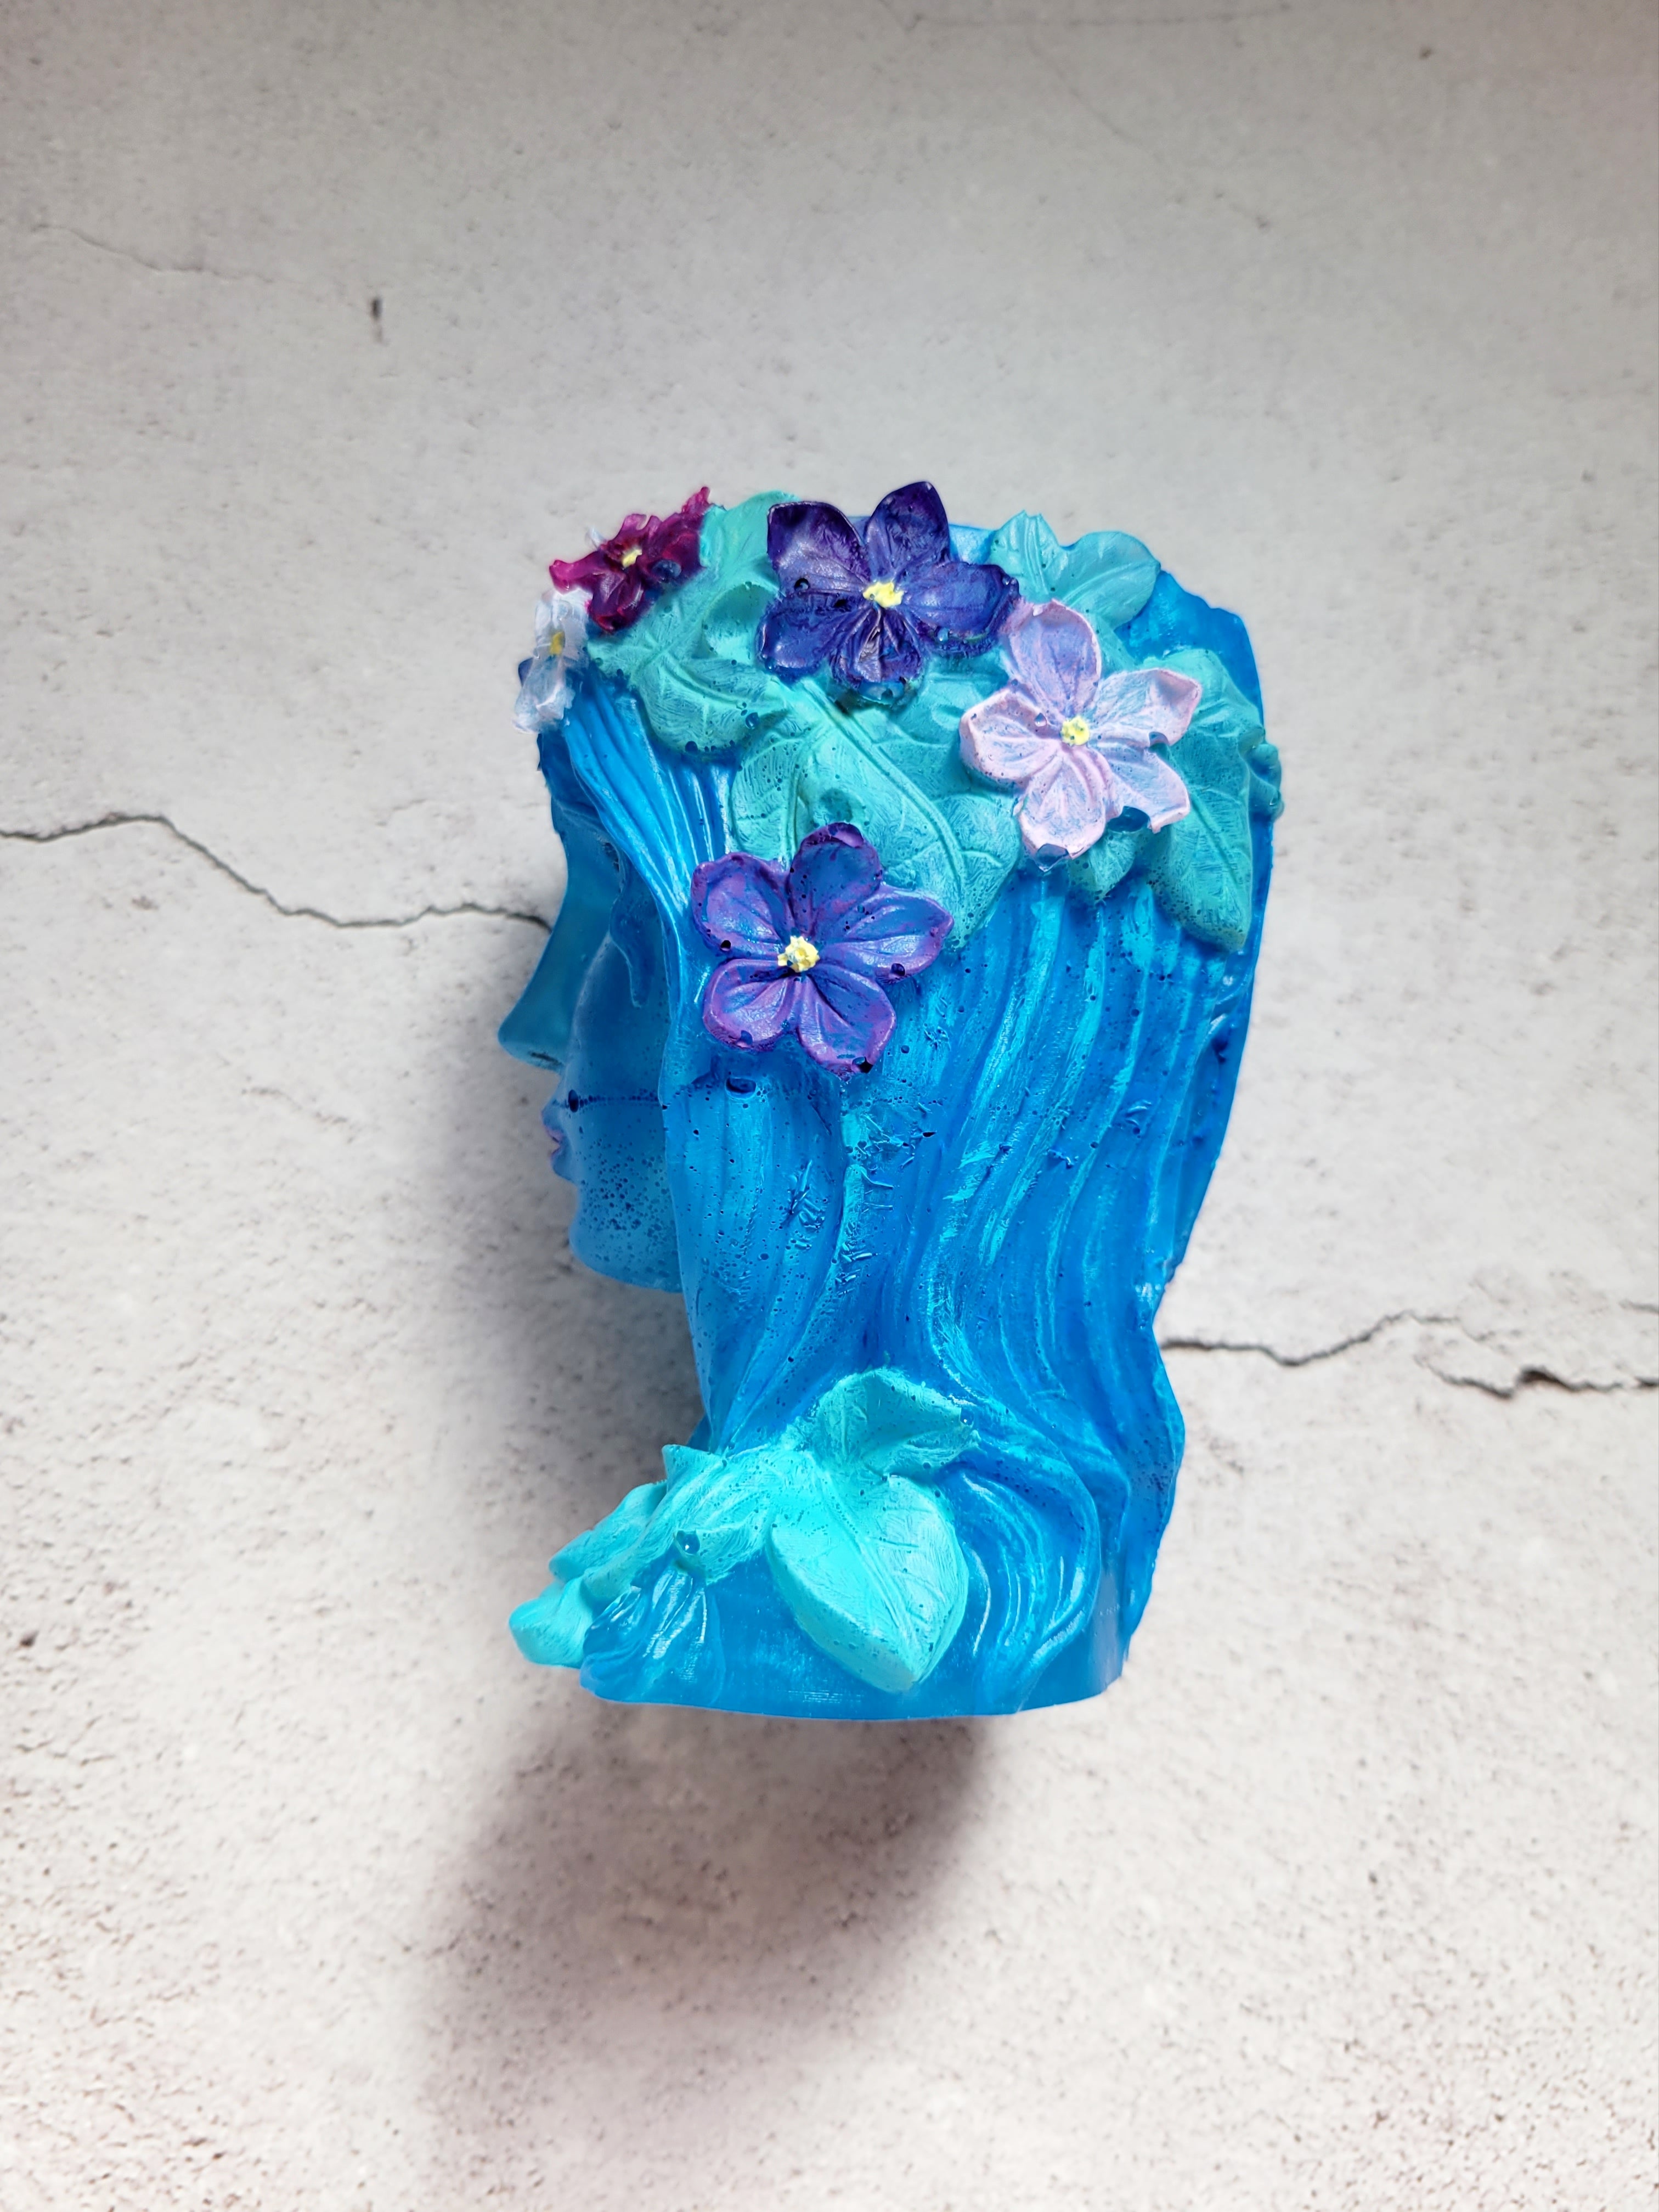 a resin made female ancient statue bust, blue in color with painted leaves and flowers. side view